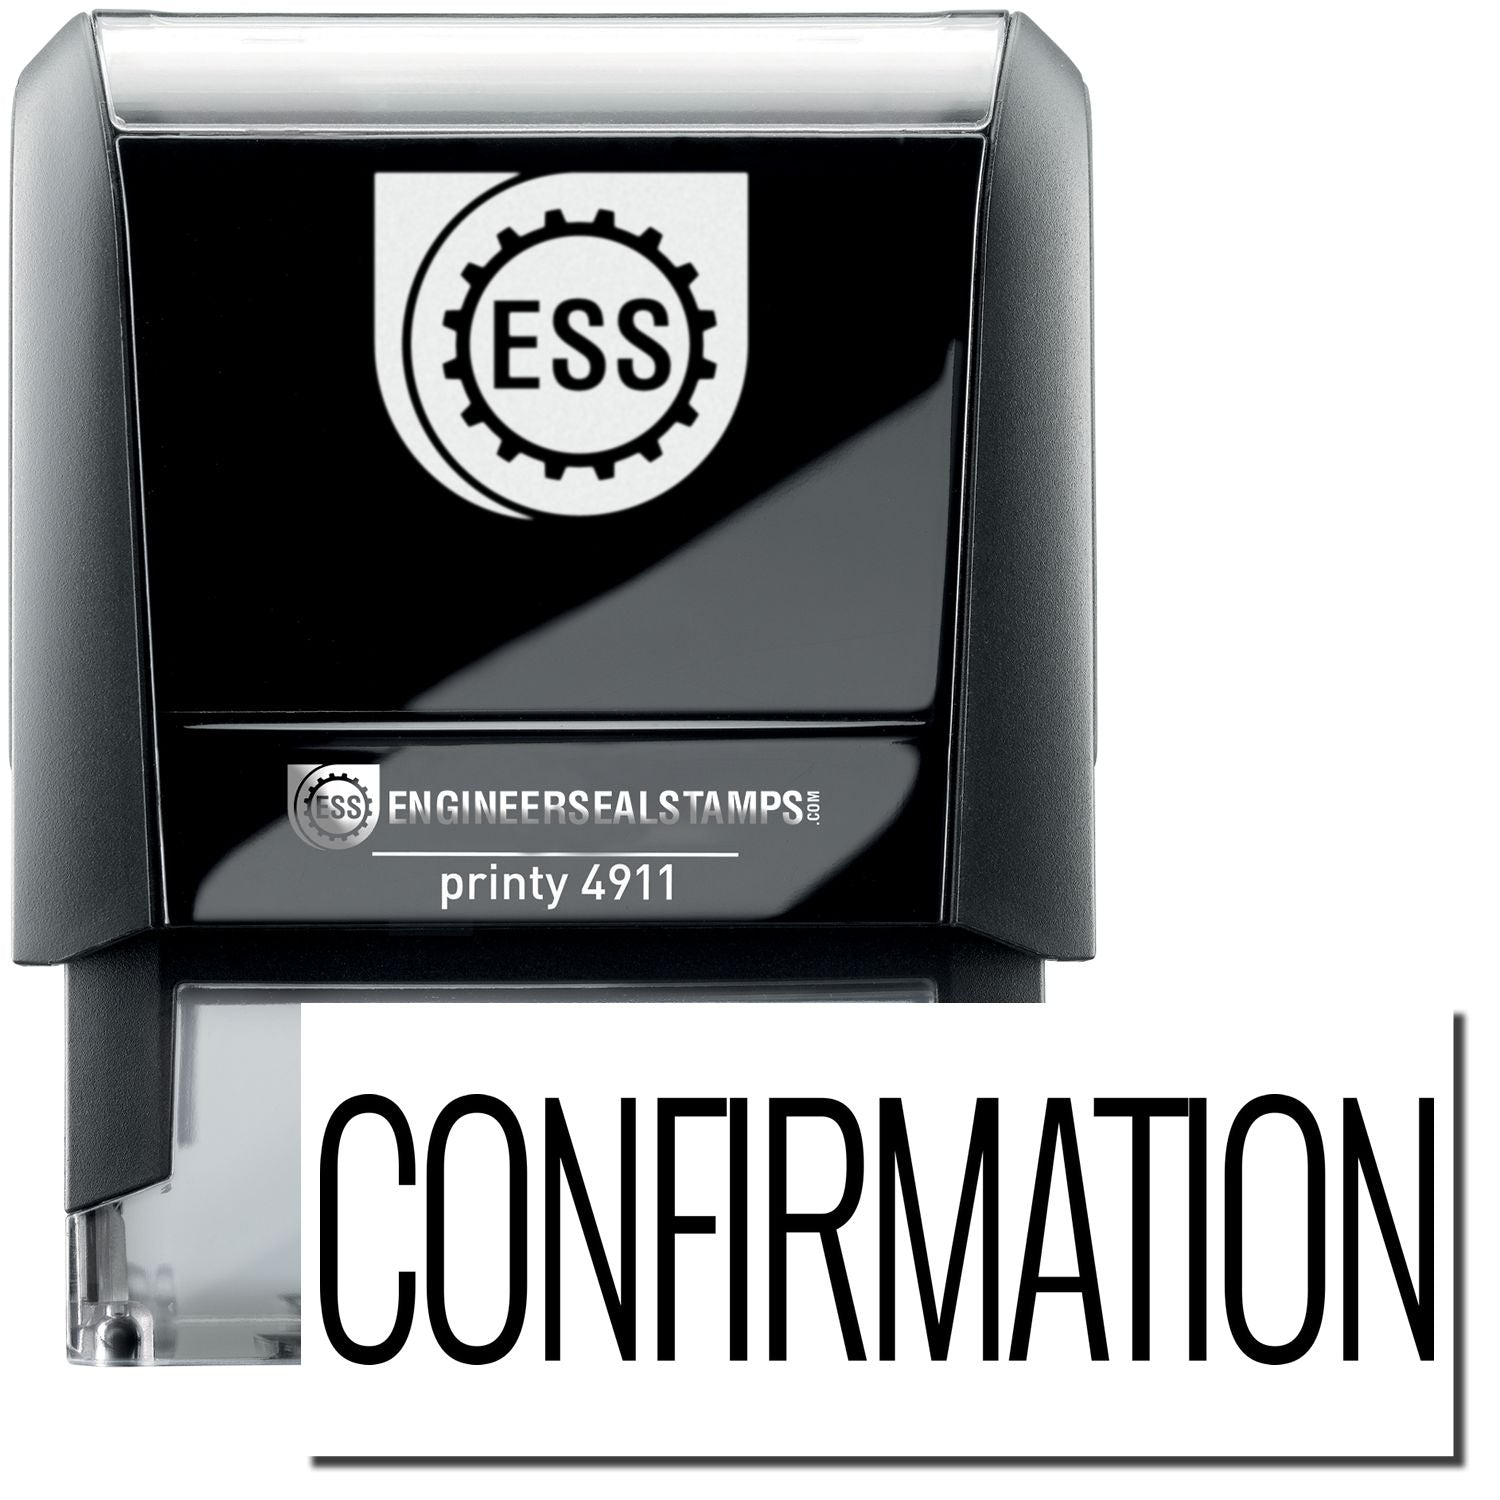 A self-inking stamp with a stamped image showing how the text "CONFIRMATION" is displayed after stamping.